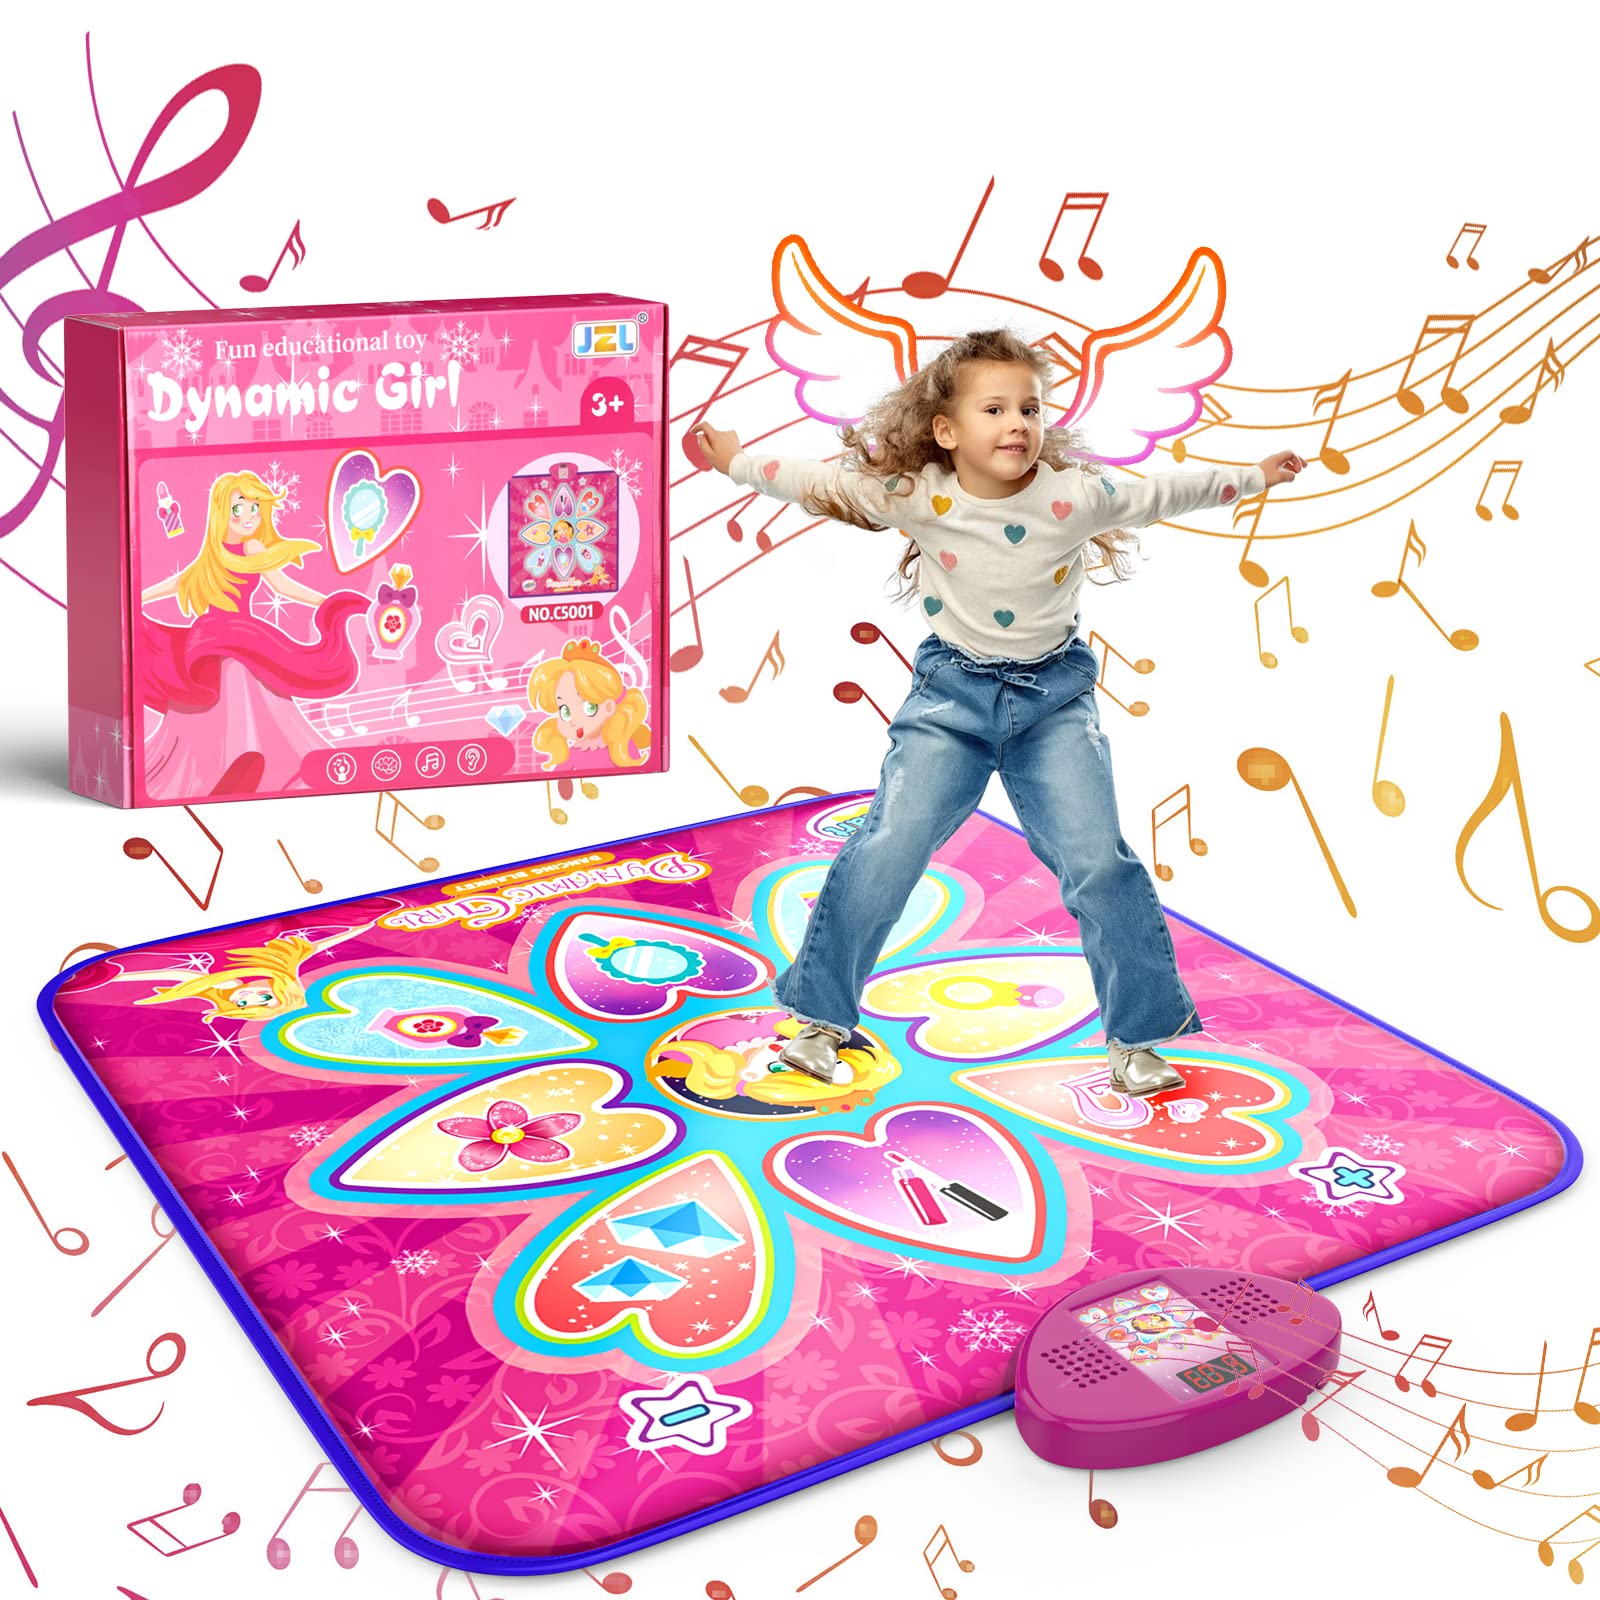 Kmuxilal 2023 Upgraded Dance Mat Toys for 3-12 Year Old Girls, Dance Pad with 7 Game Modes,Adjustable Volume,LED Light,Birthday for 3 4 5 6 7 8 9+ Year Old Girls